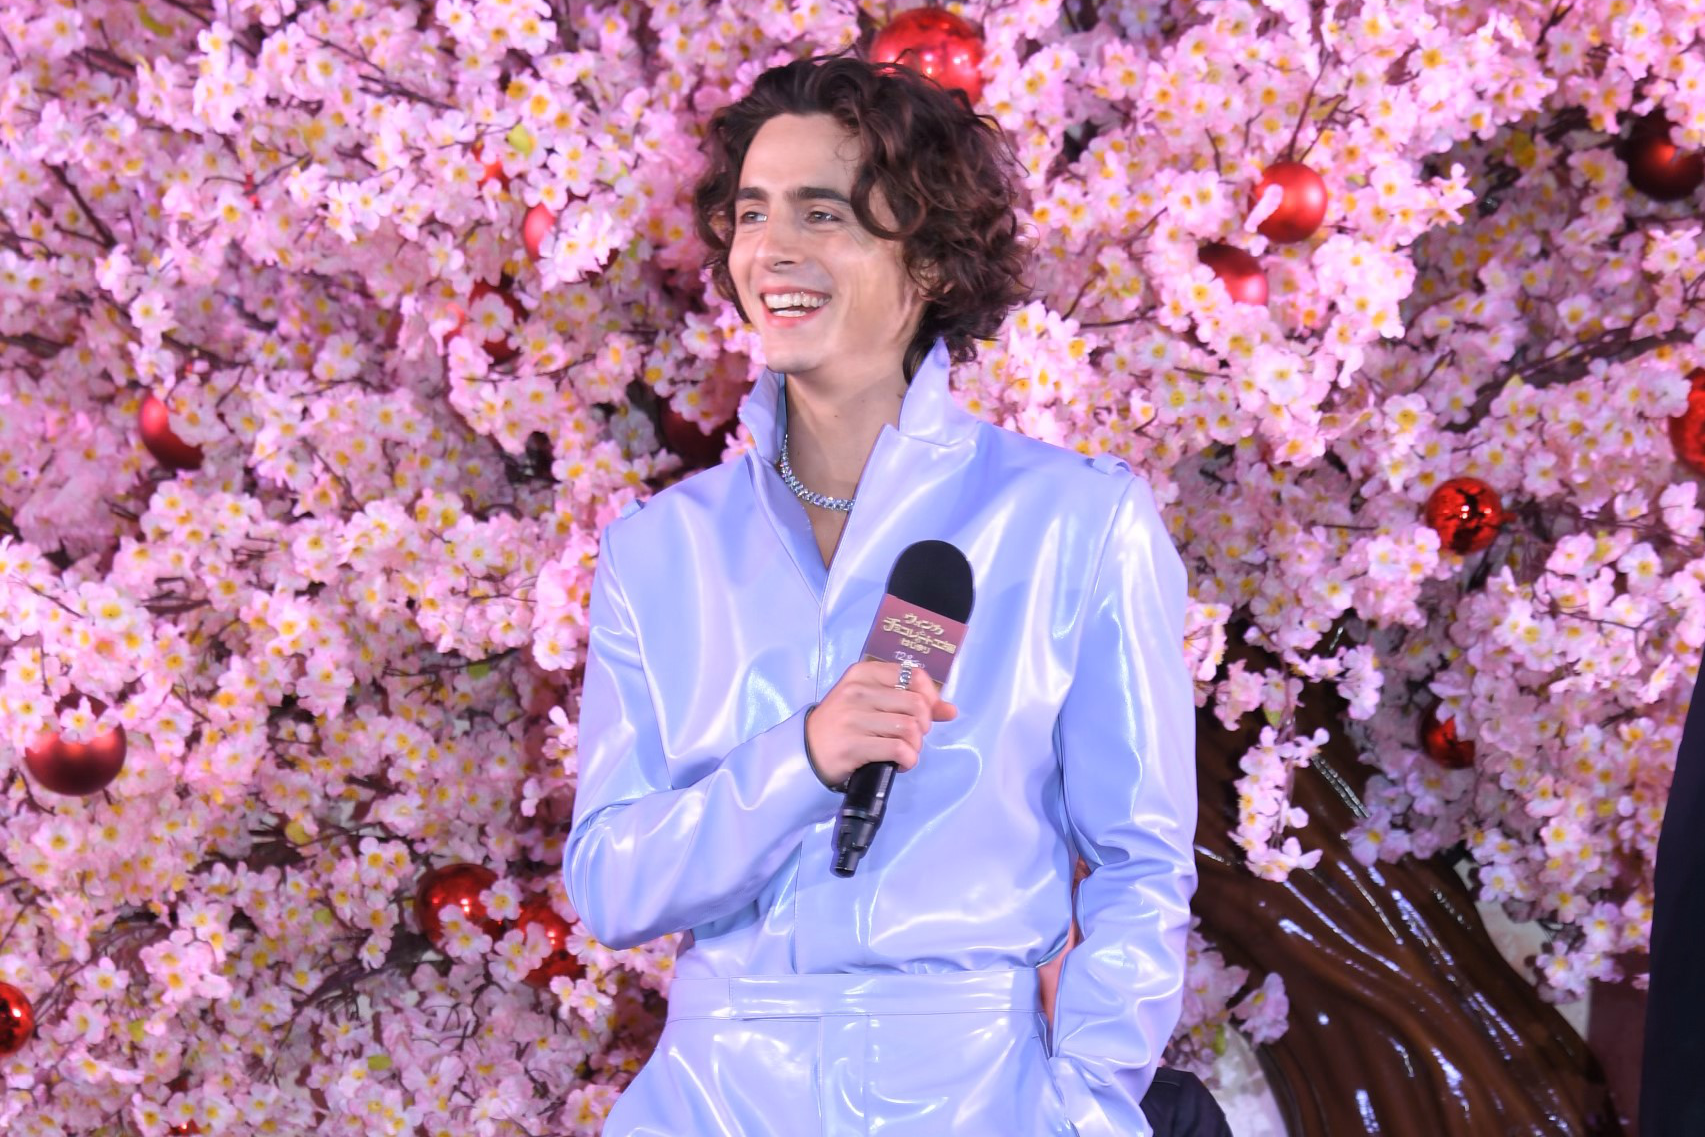 Timothee Chalomet wears a shiny lavender leather Prada suit at the Wonka red carpet premiere in Tokyo